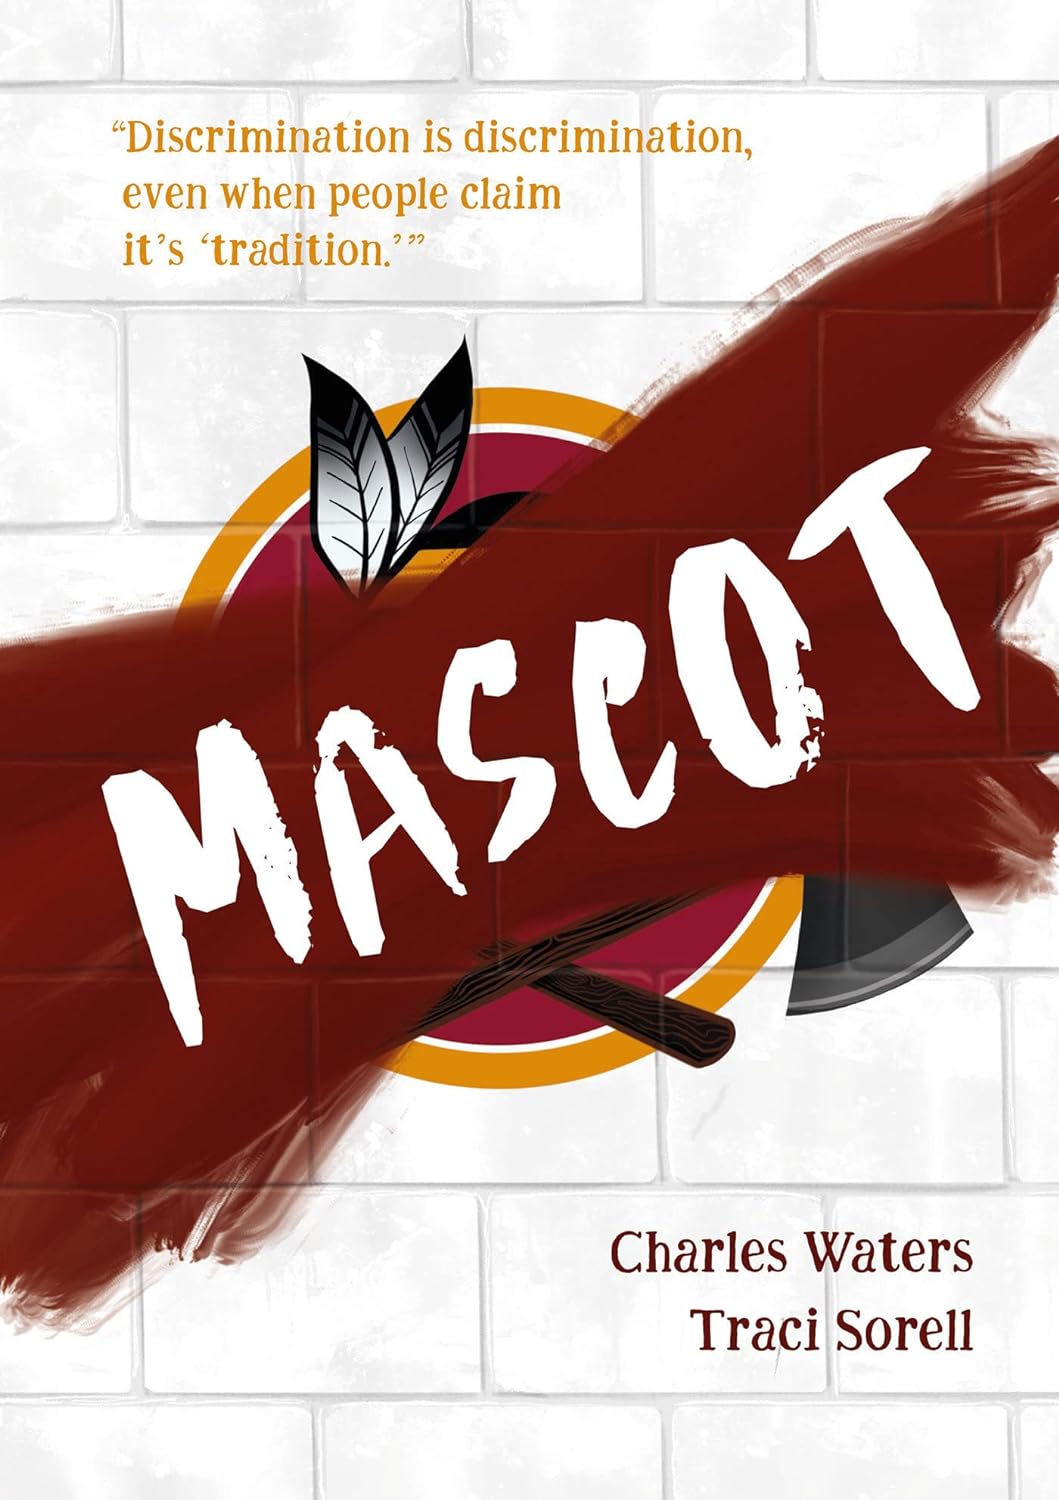 Mascot by Charles Waters & Traci Sorell